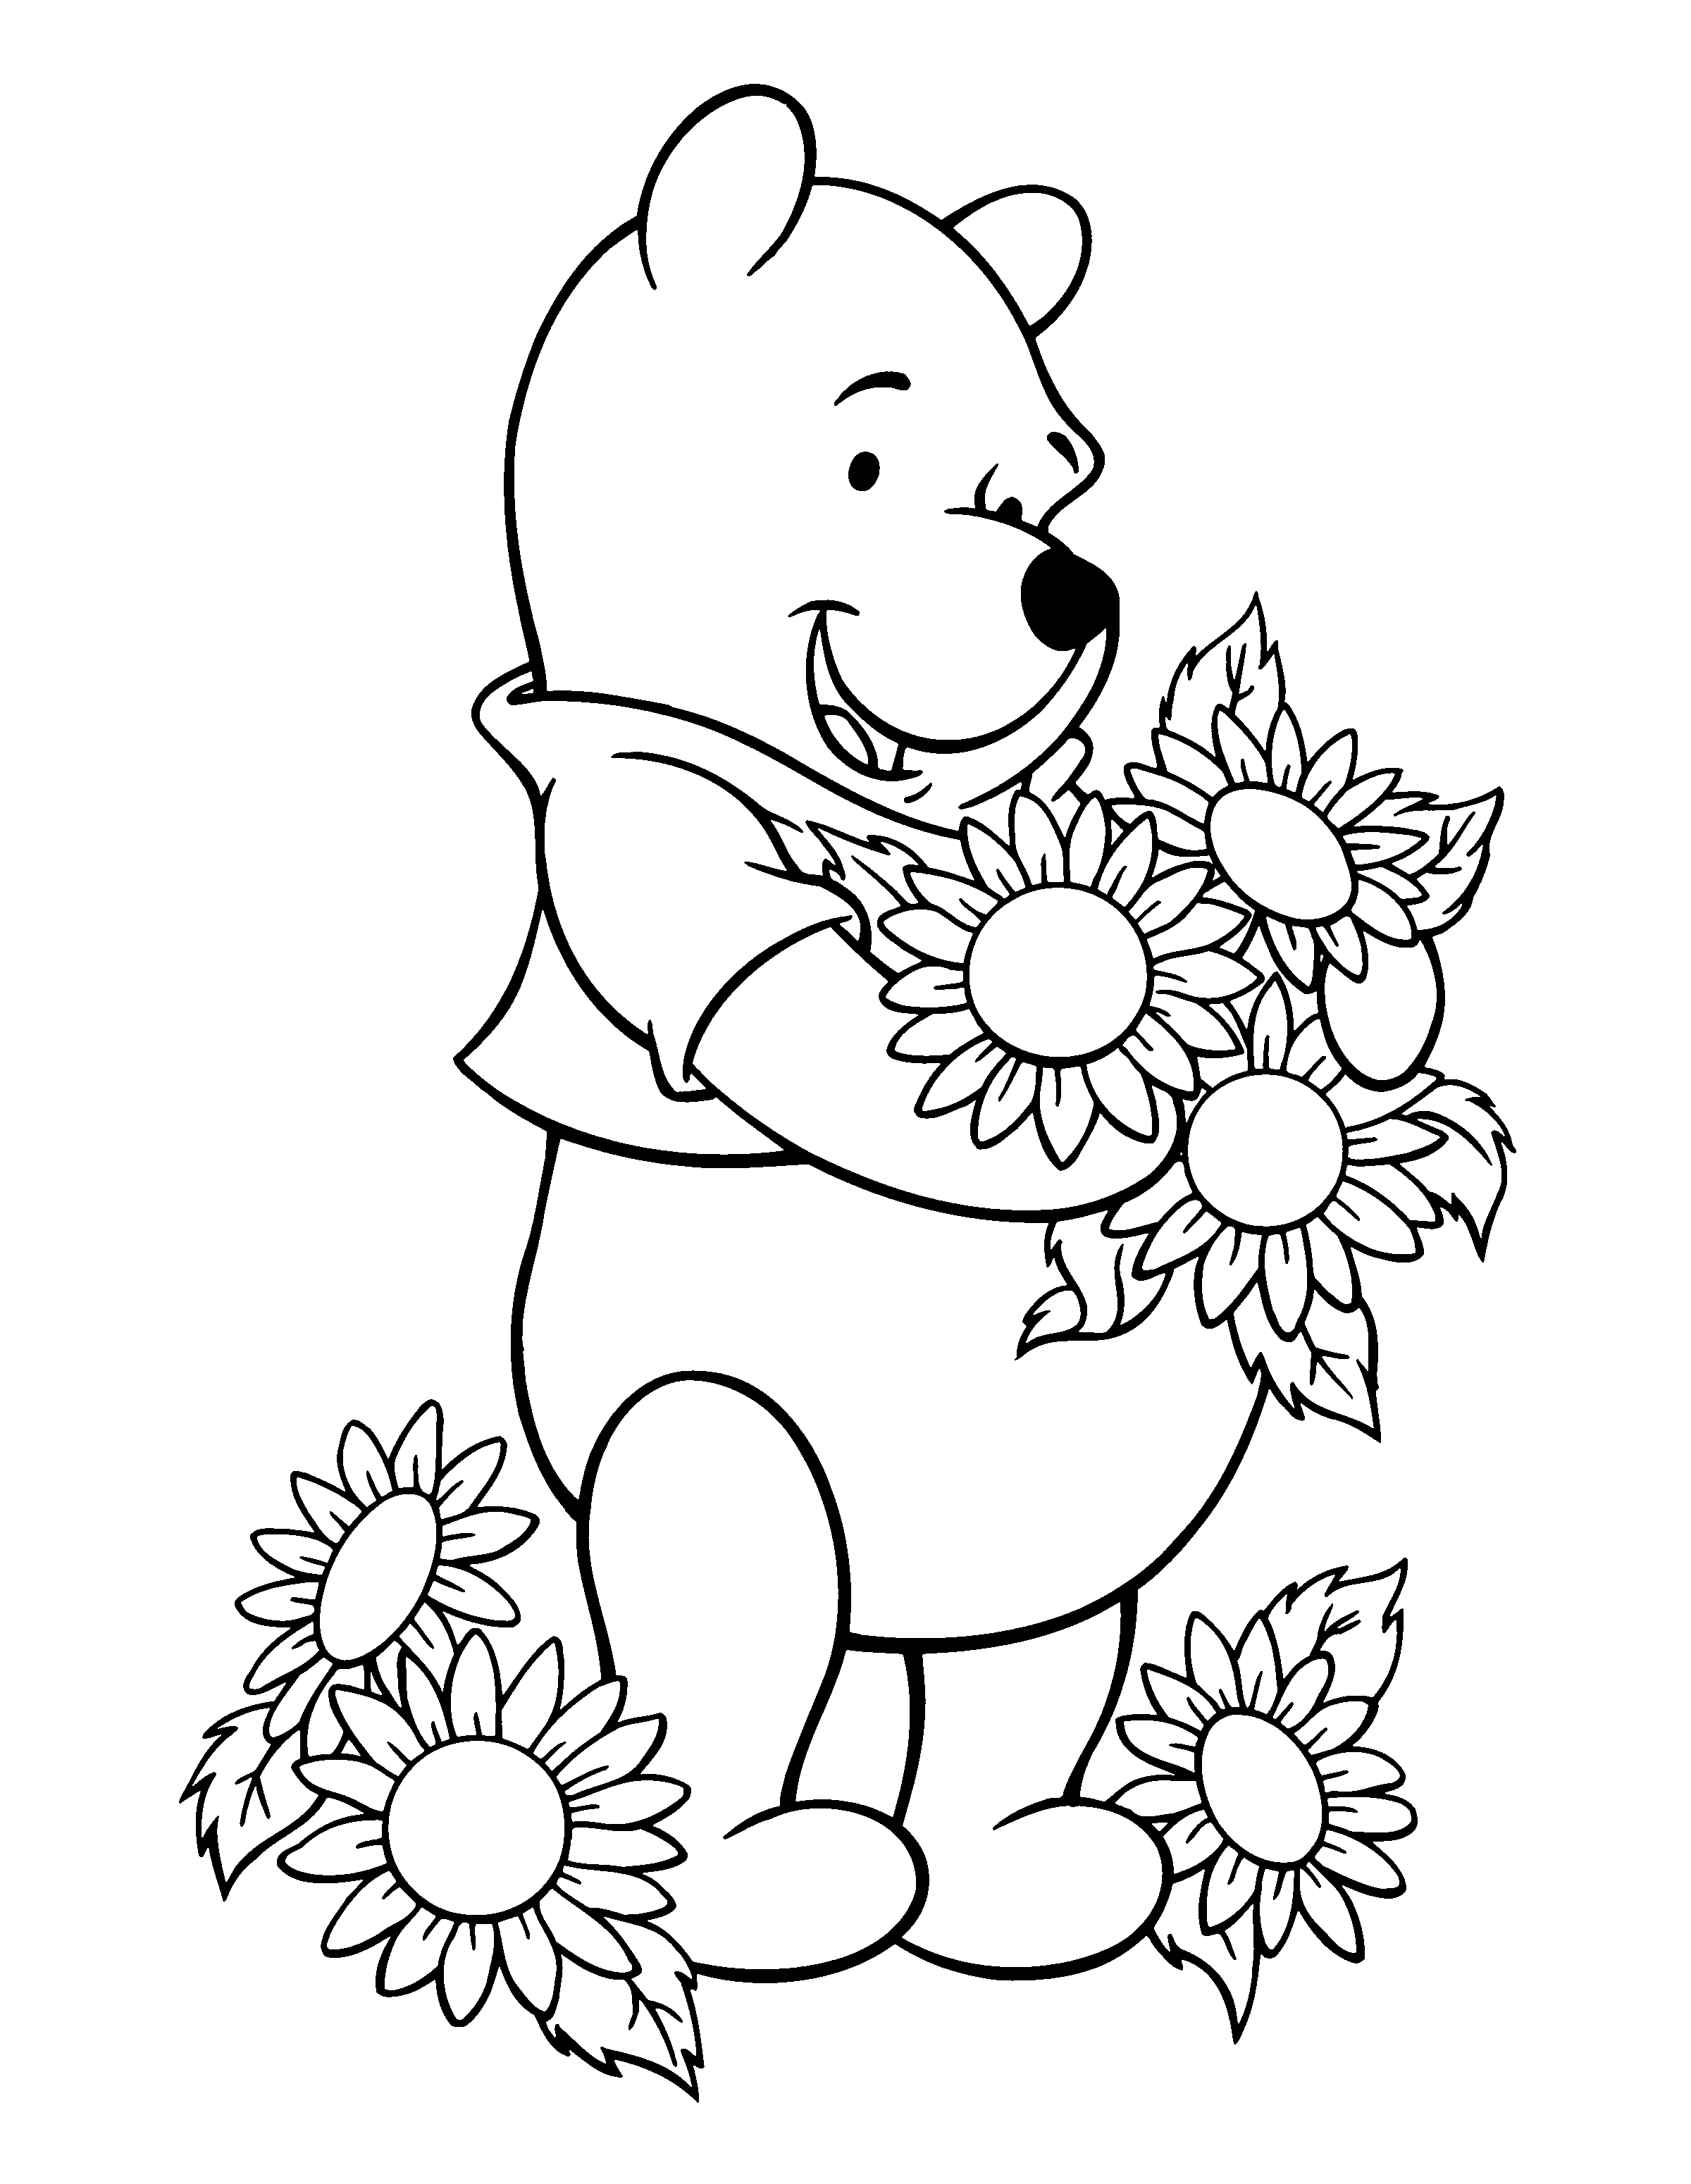 pooh bear coloring pictures free printable winnie the pooh coloring pages for kids pictures coloring pooh bear 